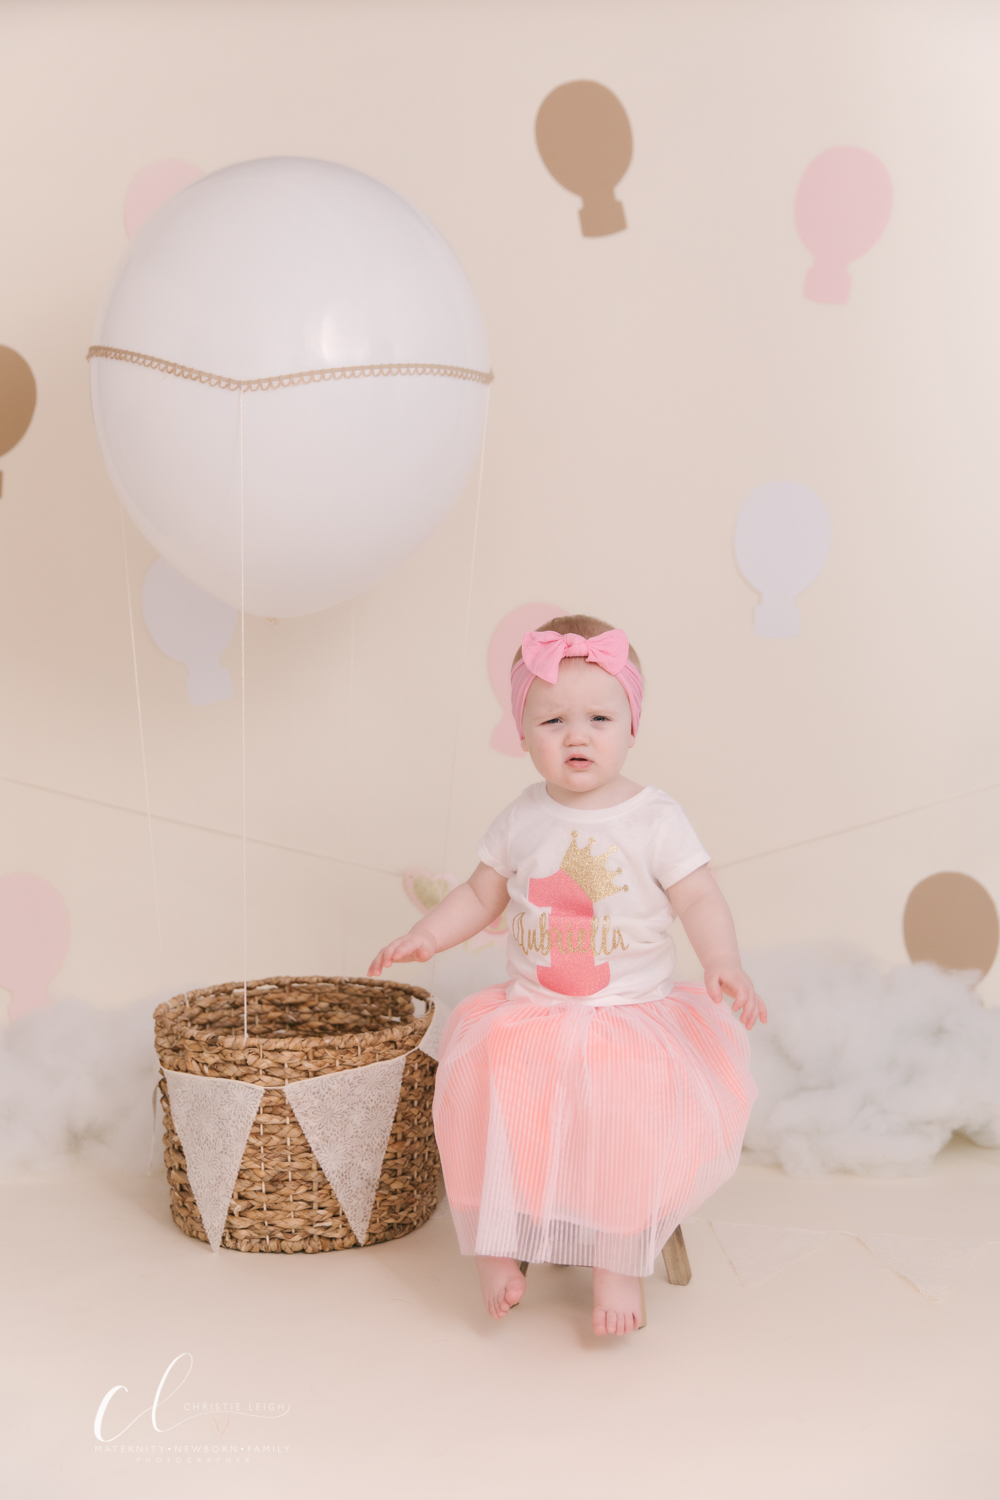 Hot_air_balloon_birthday_session_little_girl_turns_one__Pink_and_Ivory_Hot_air_balloon_first_birthday_pictures_in_Cortland_Ohio_by_child_and_family_photogrpaher_christie_leigh_photo-3.JPG